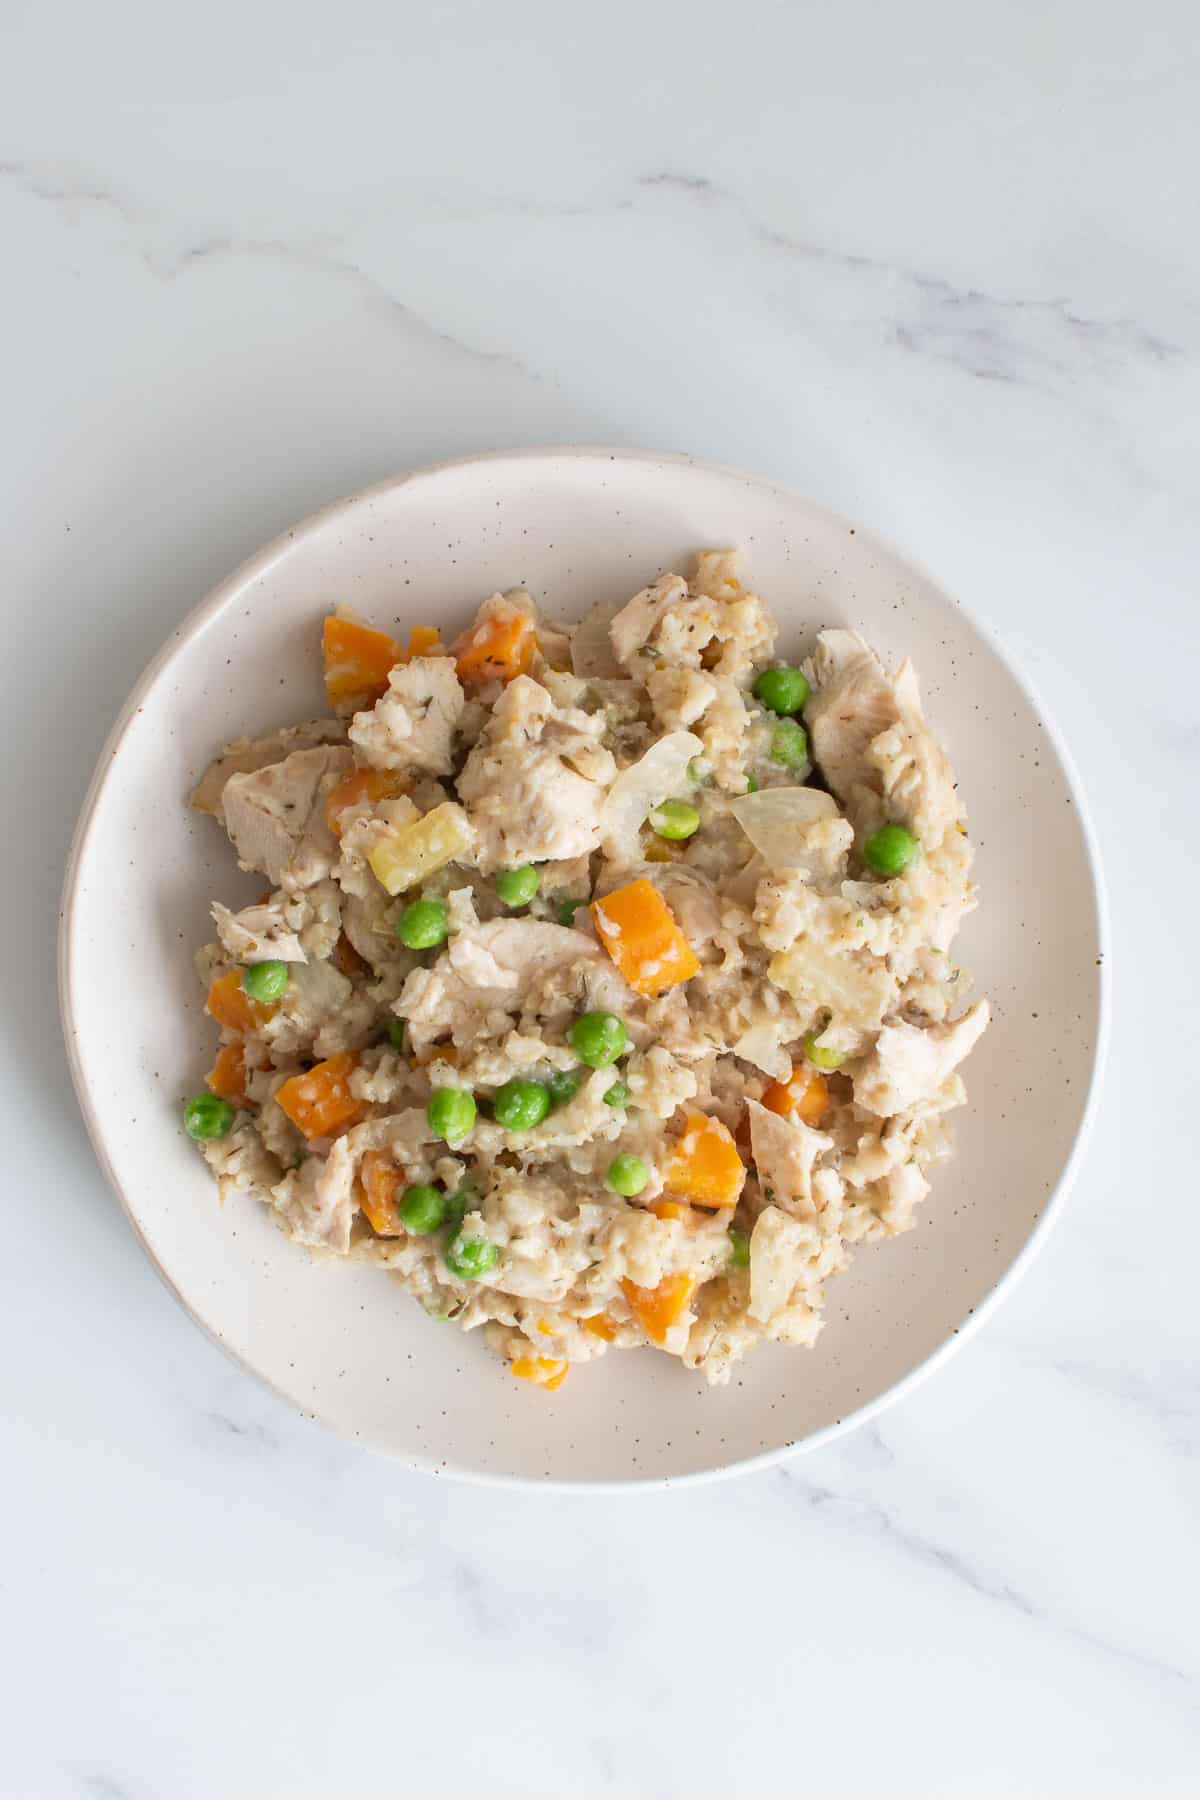 A plate with crockpot brown rice and chicken.